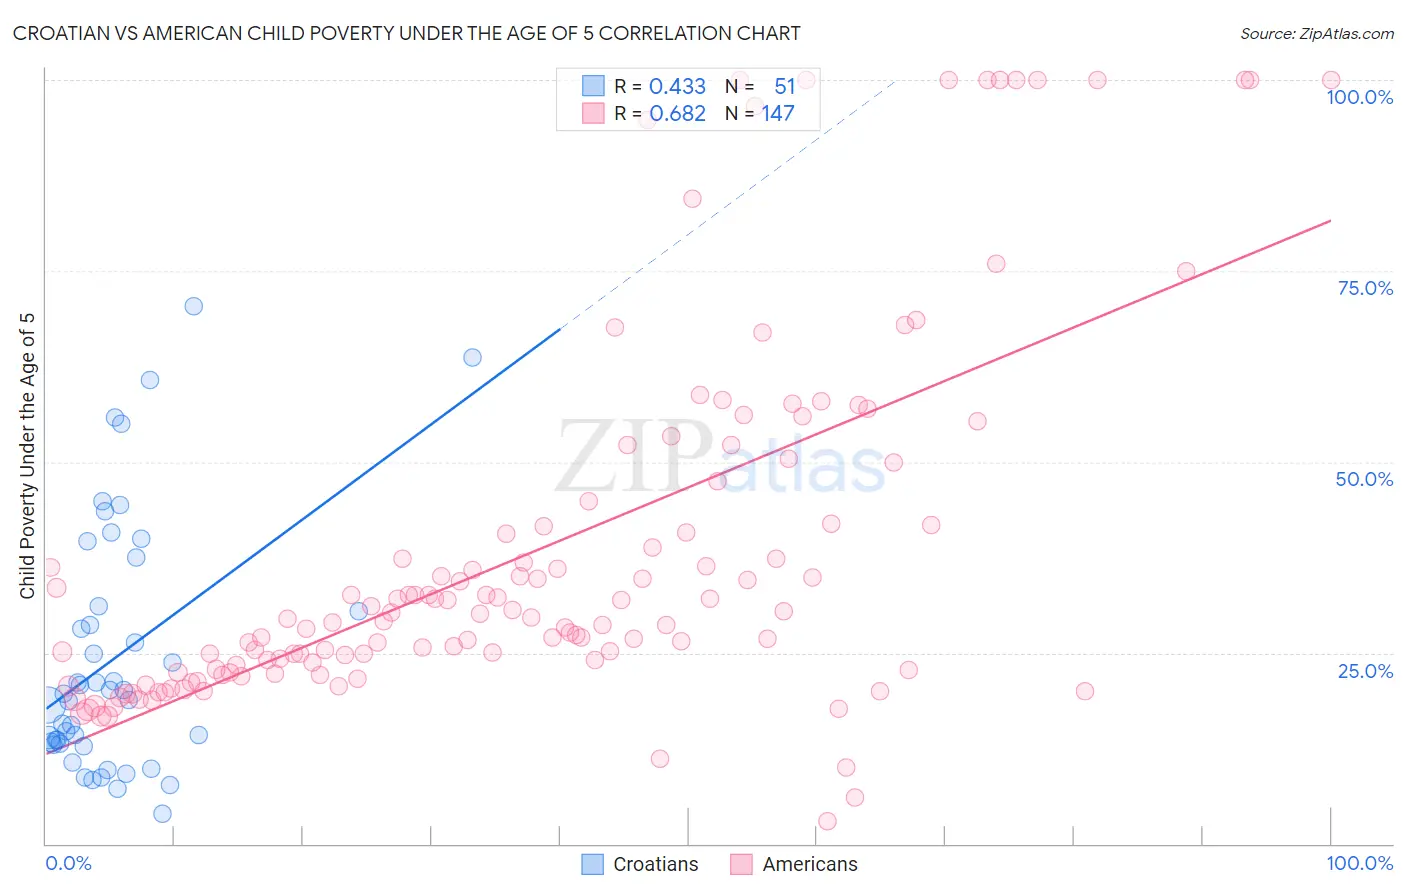 Croatian vs American Child Poverty Under the Age of 5